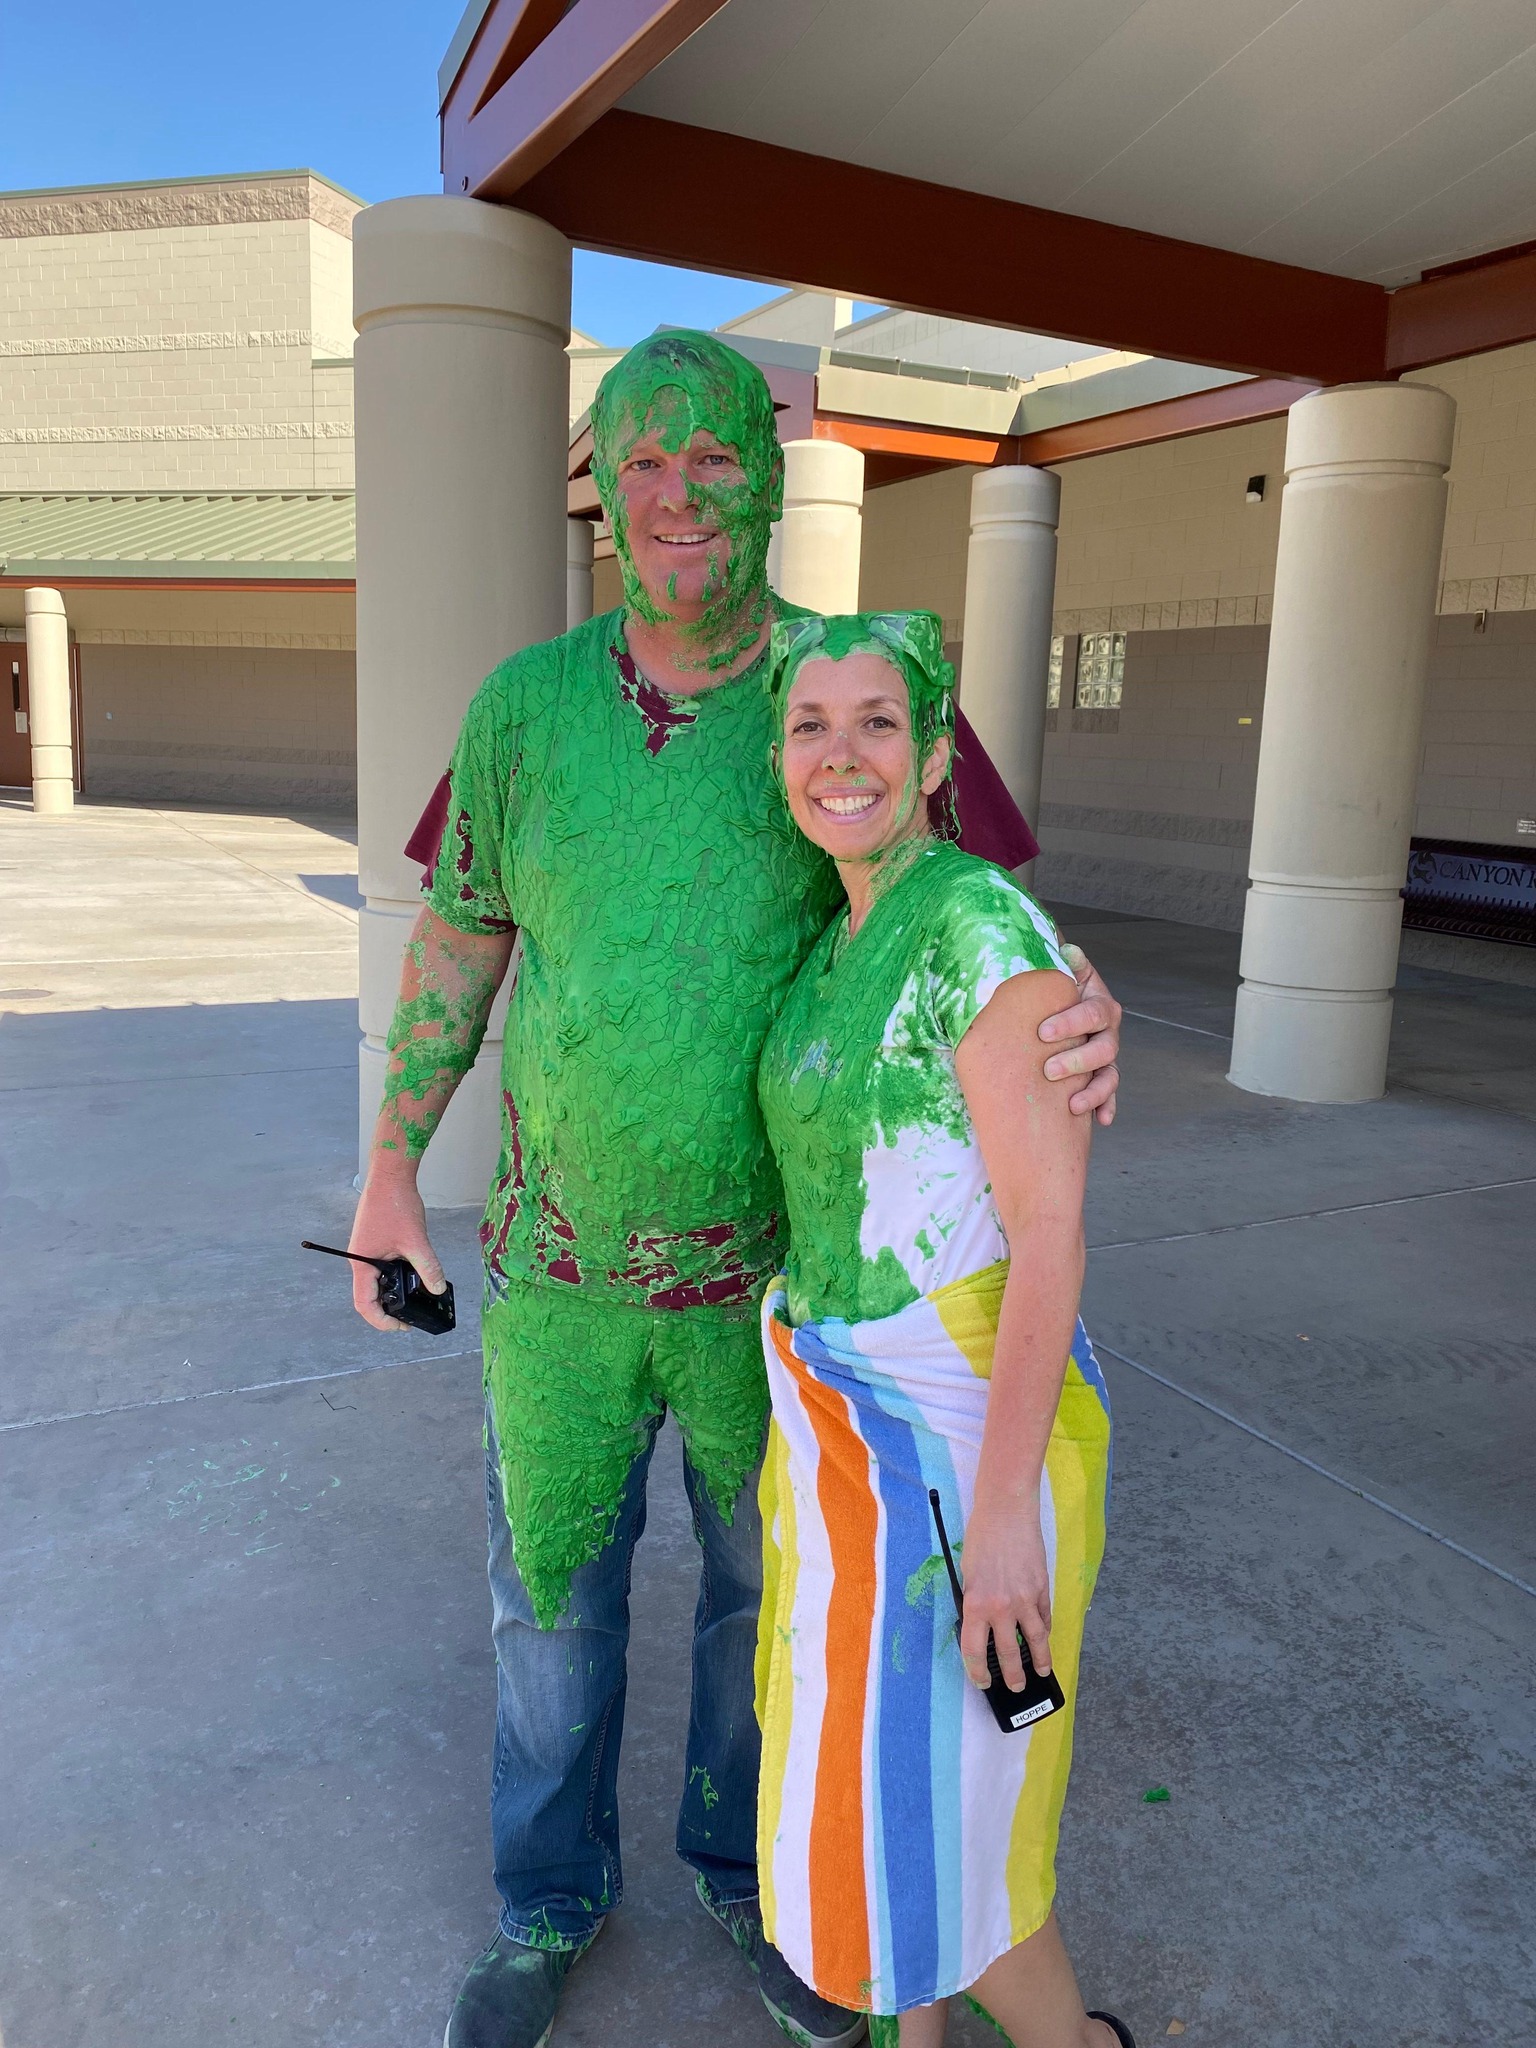 Principals standing with slime on them